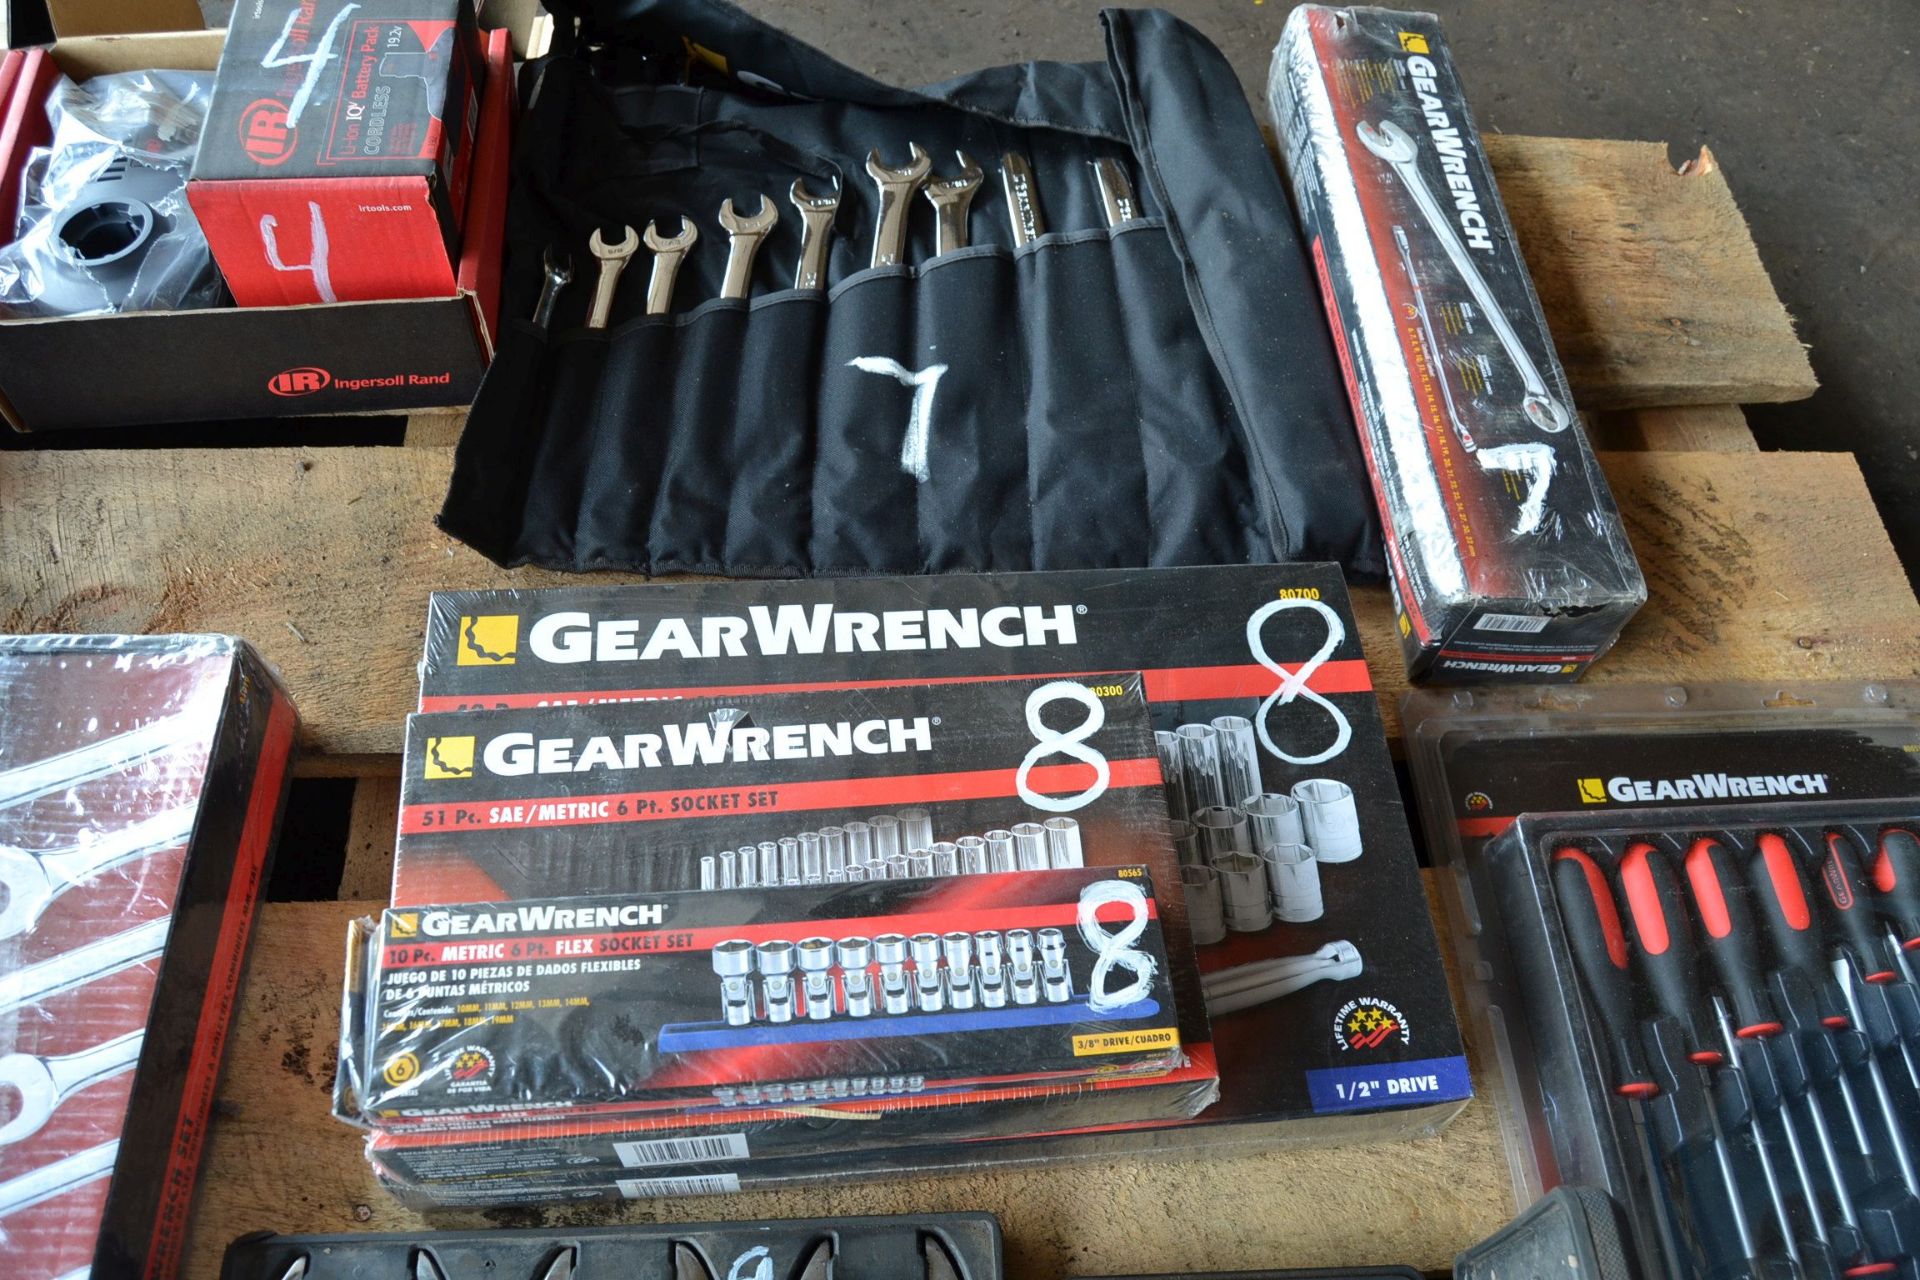 (1) NEW GEAR WRENCH 49 PC SOCKET SET (1) NEW GEAR WRENCH 51 PC SOCKET SET (1) NEW GEAR WRENCH FLEX